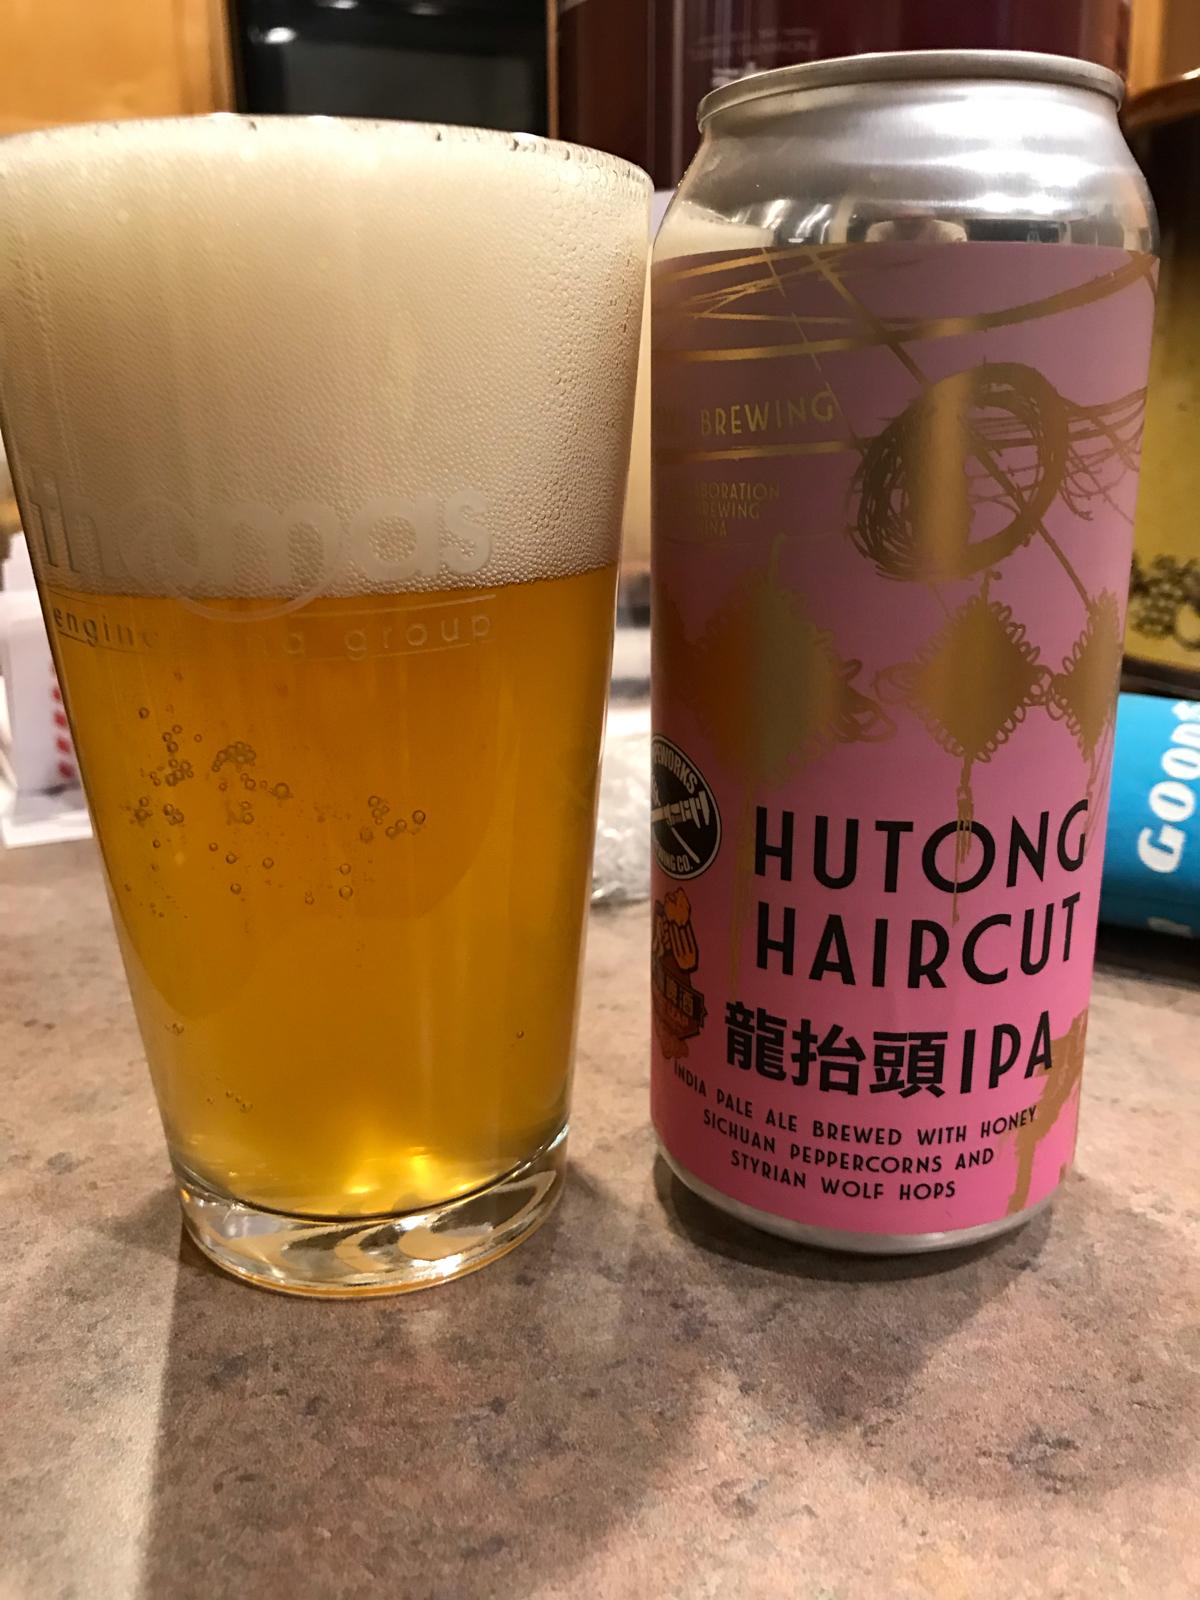 Hutong Haircut (Collaboration with Great Leap Brewing)